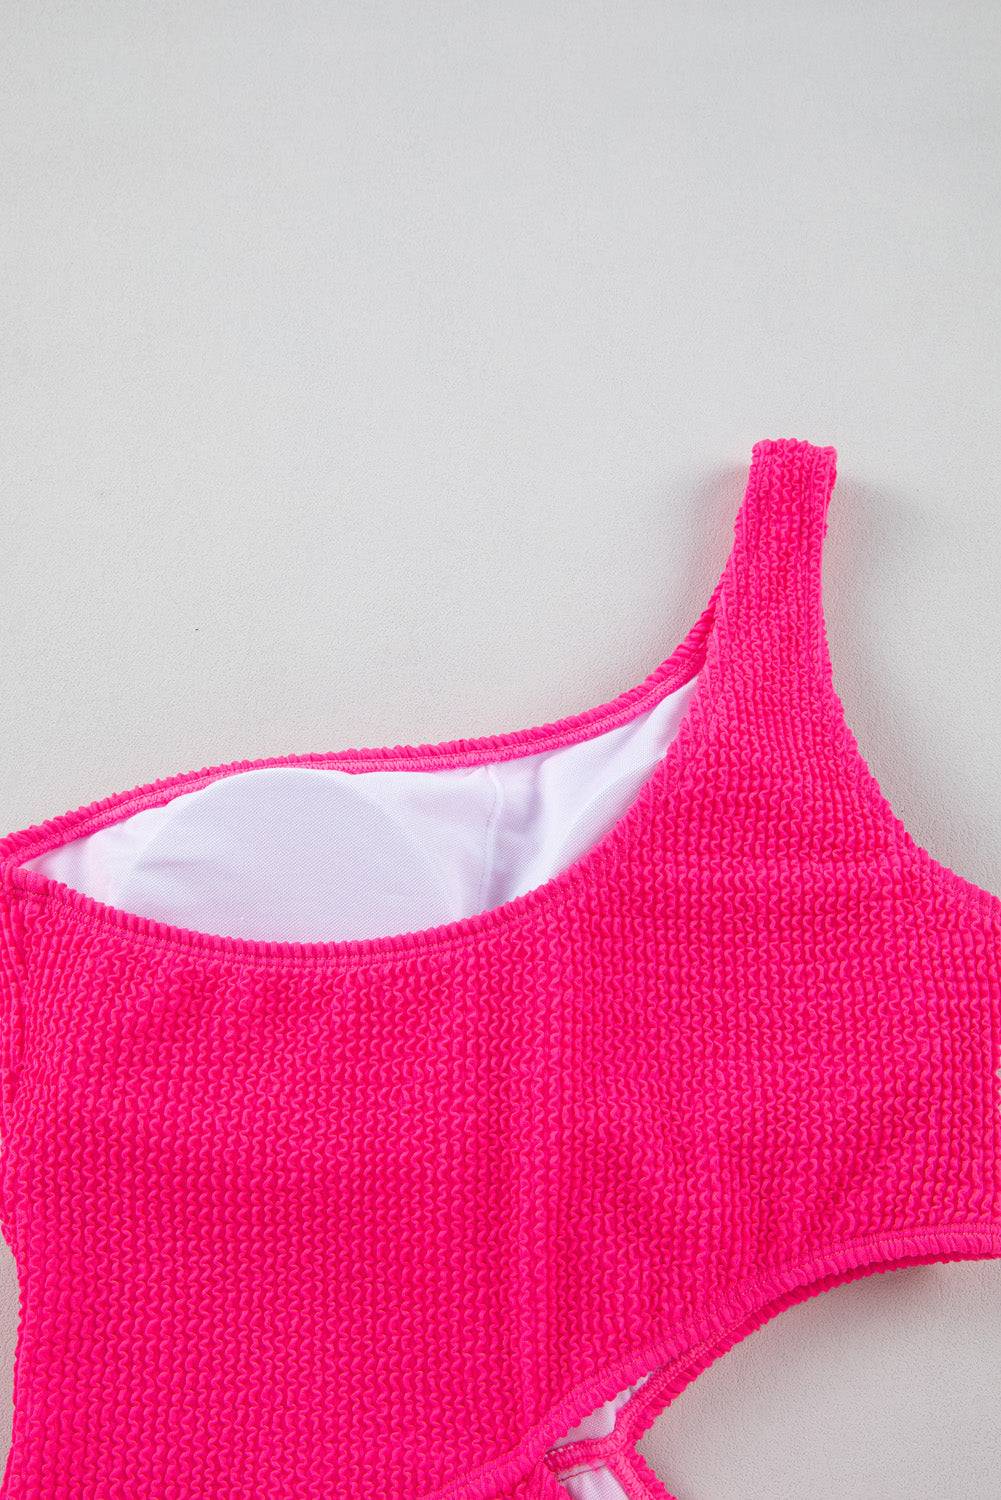 a pink knitted tank top laying on top of a table